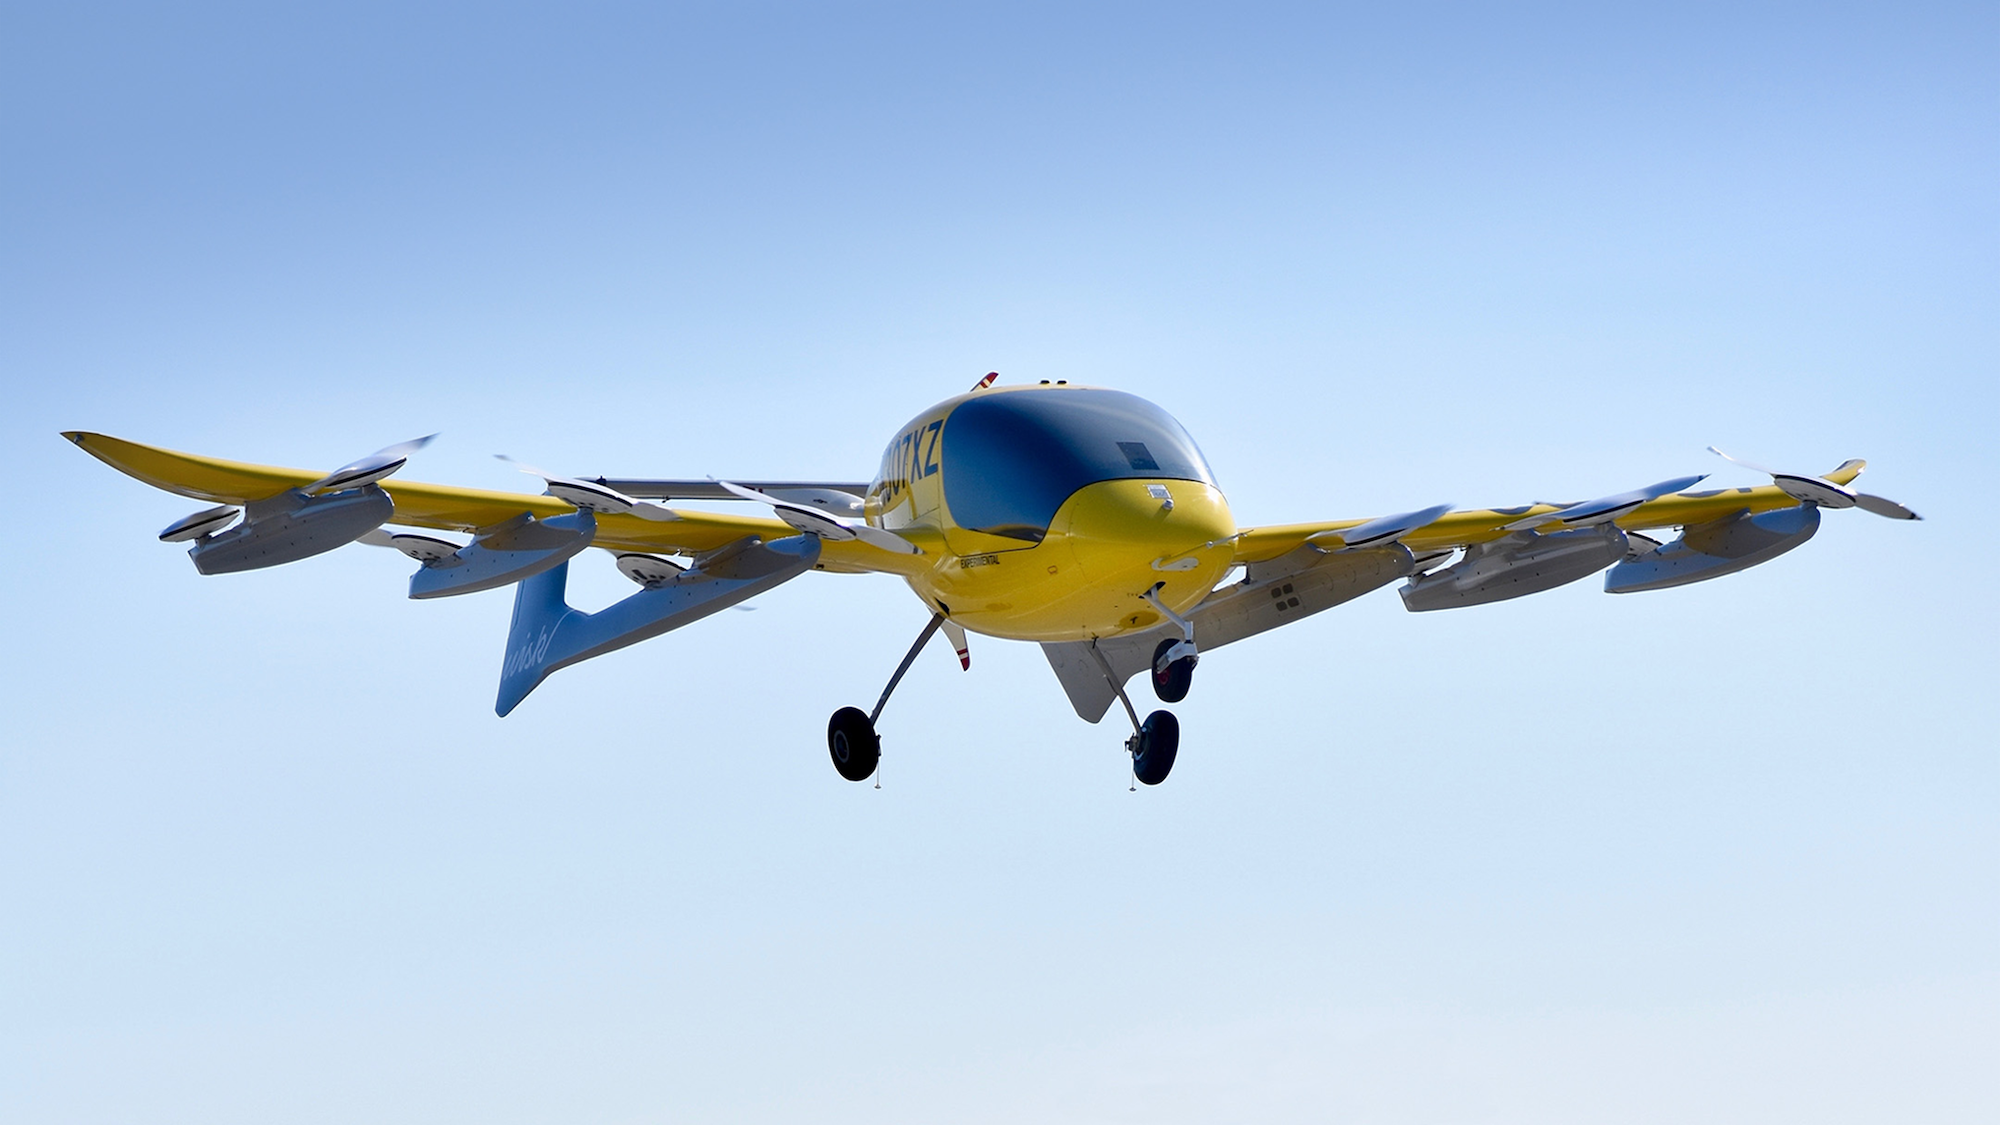 This little air-taxi company just got a big lift from Boeing